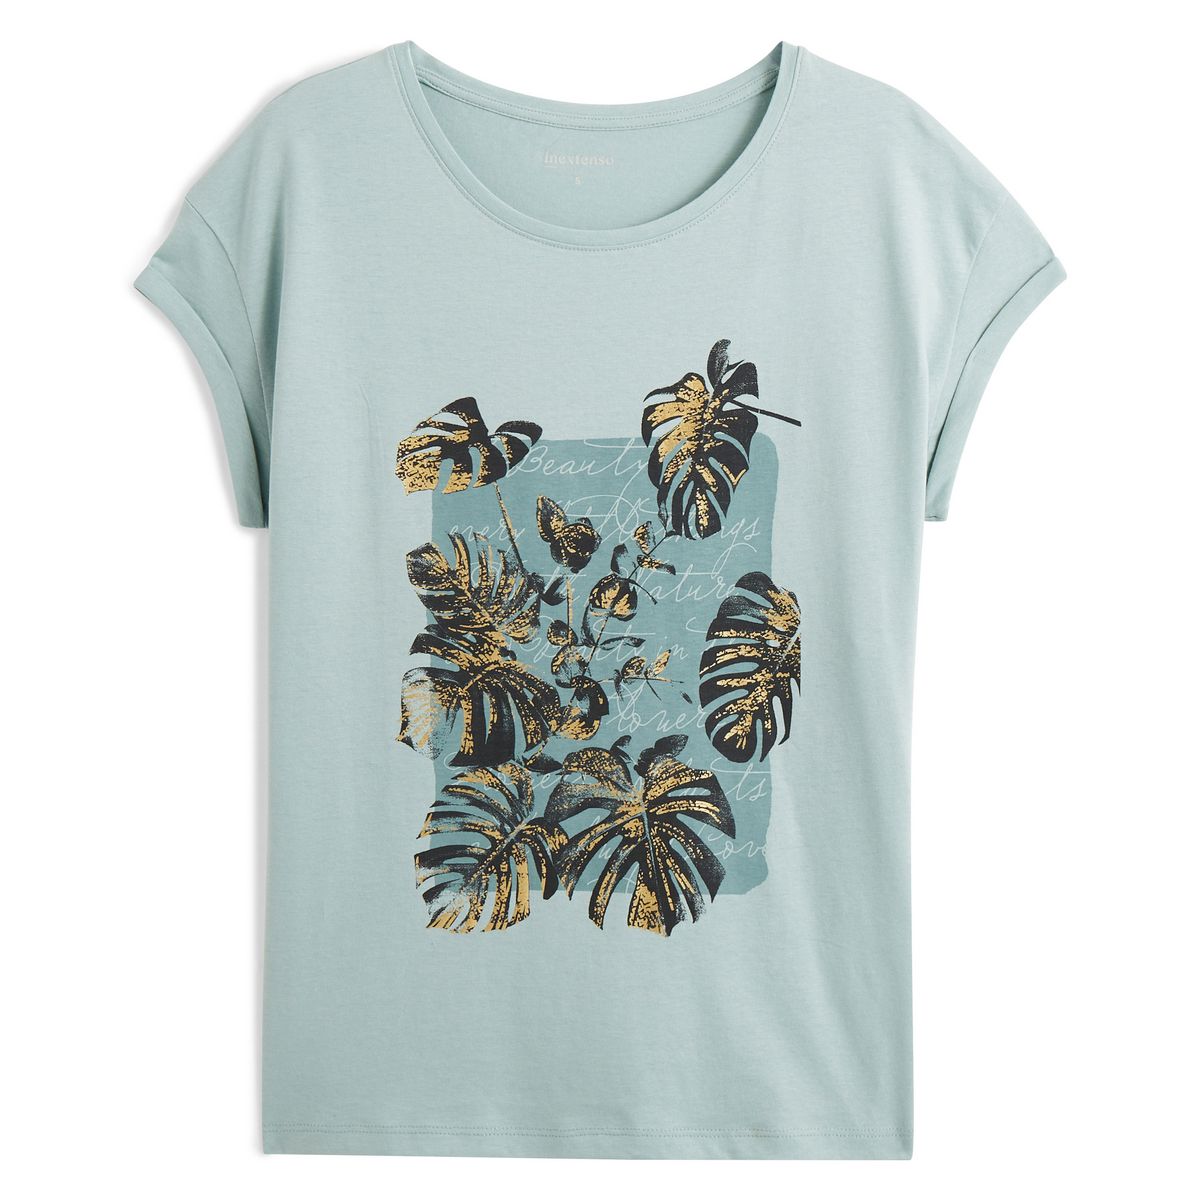 INEXTENSO T-shirt turquoise femme